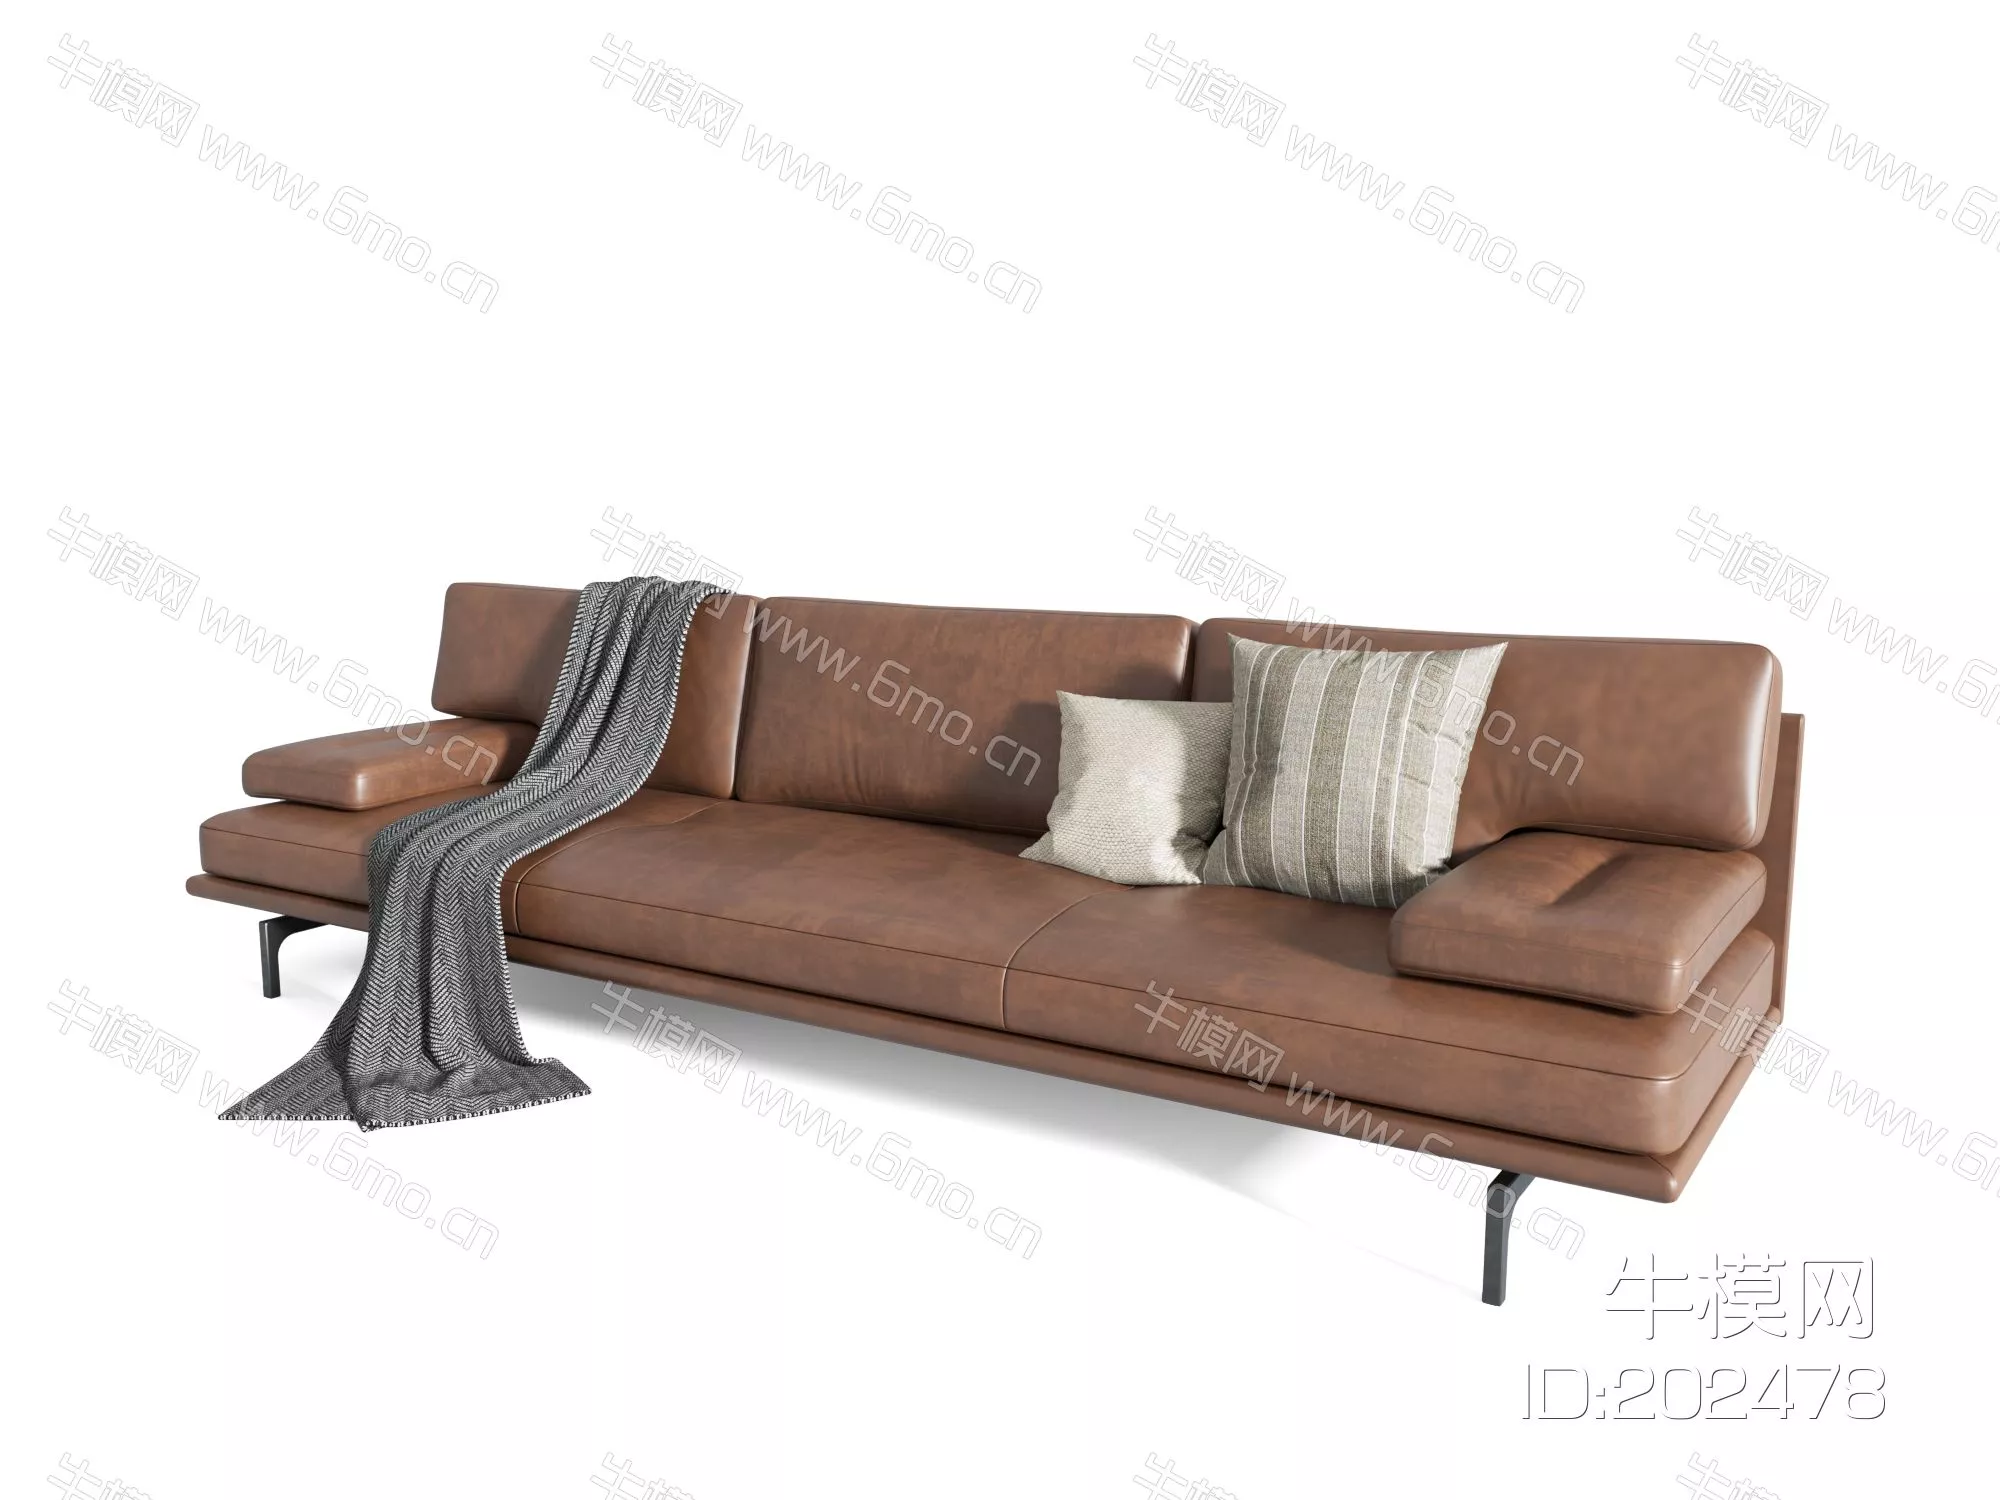 MODERN SOFA - SKETCHUP 3D MODEL - VRAY OR ENSCAPE - ID13174